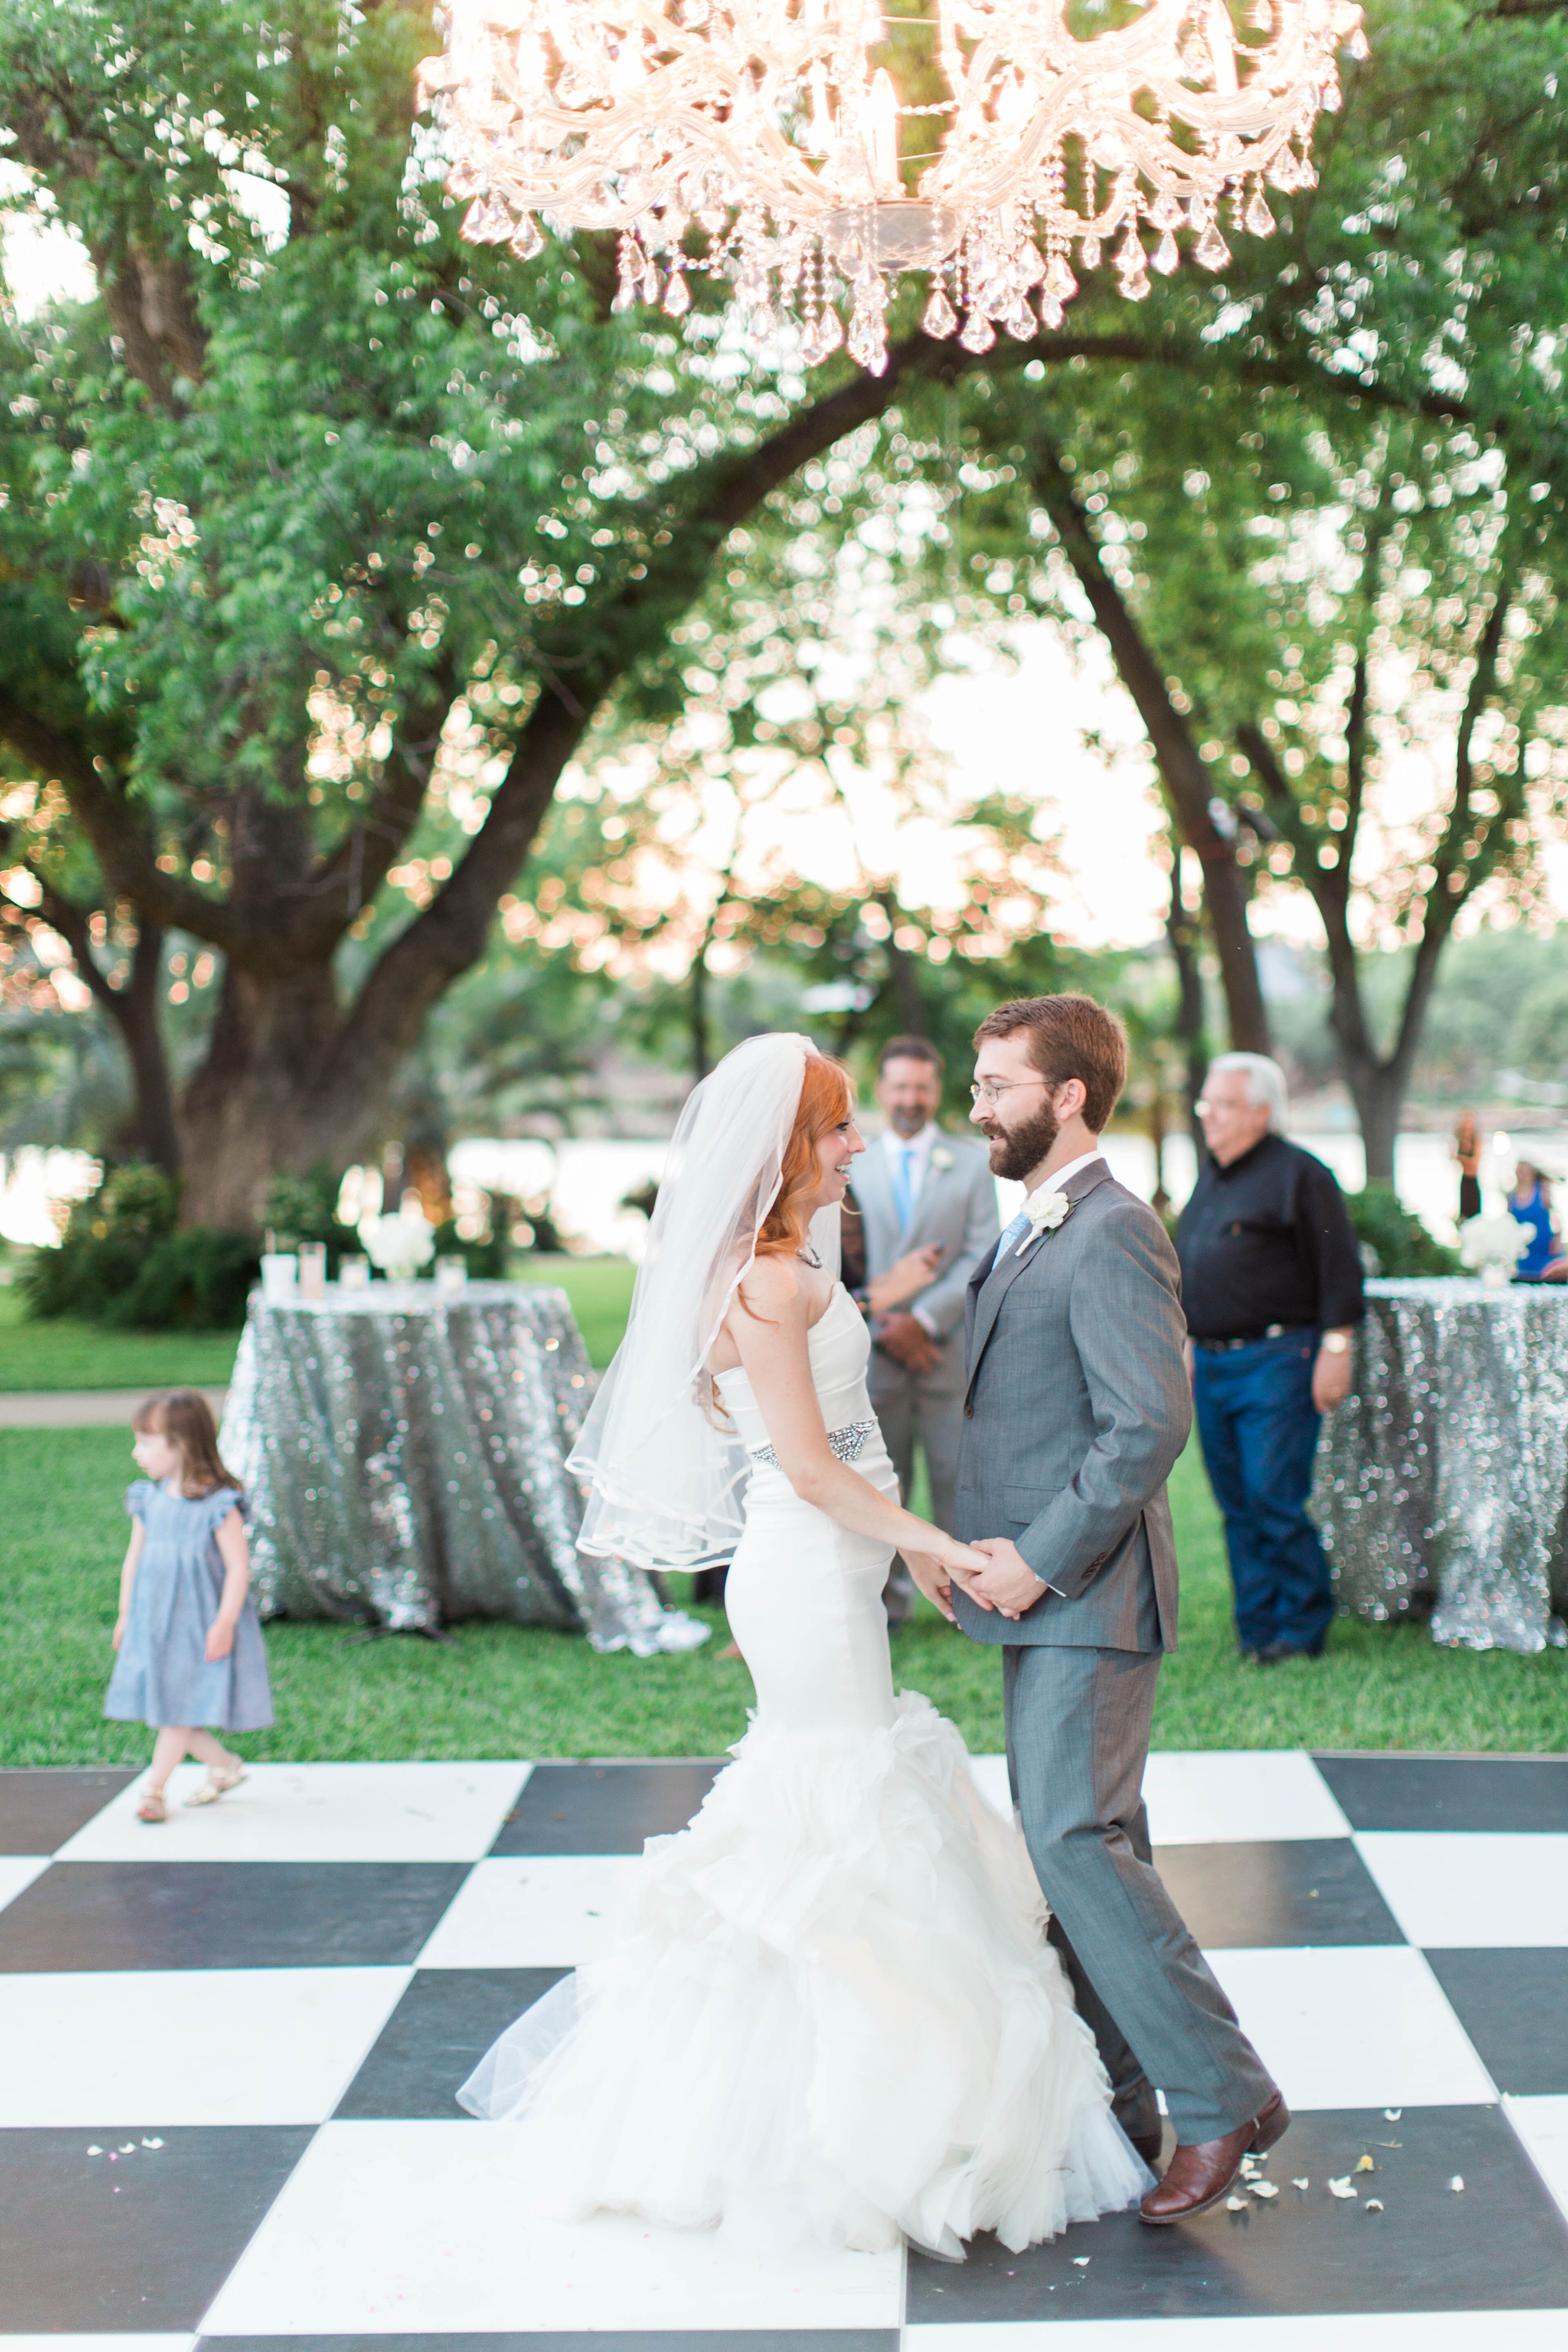 Black-and-White Checkerboard Dance Floor